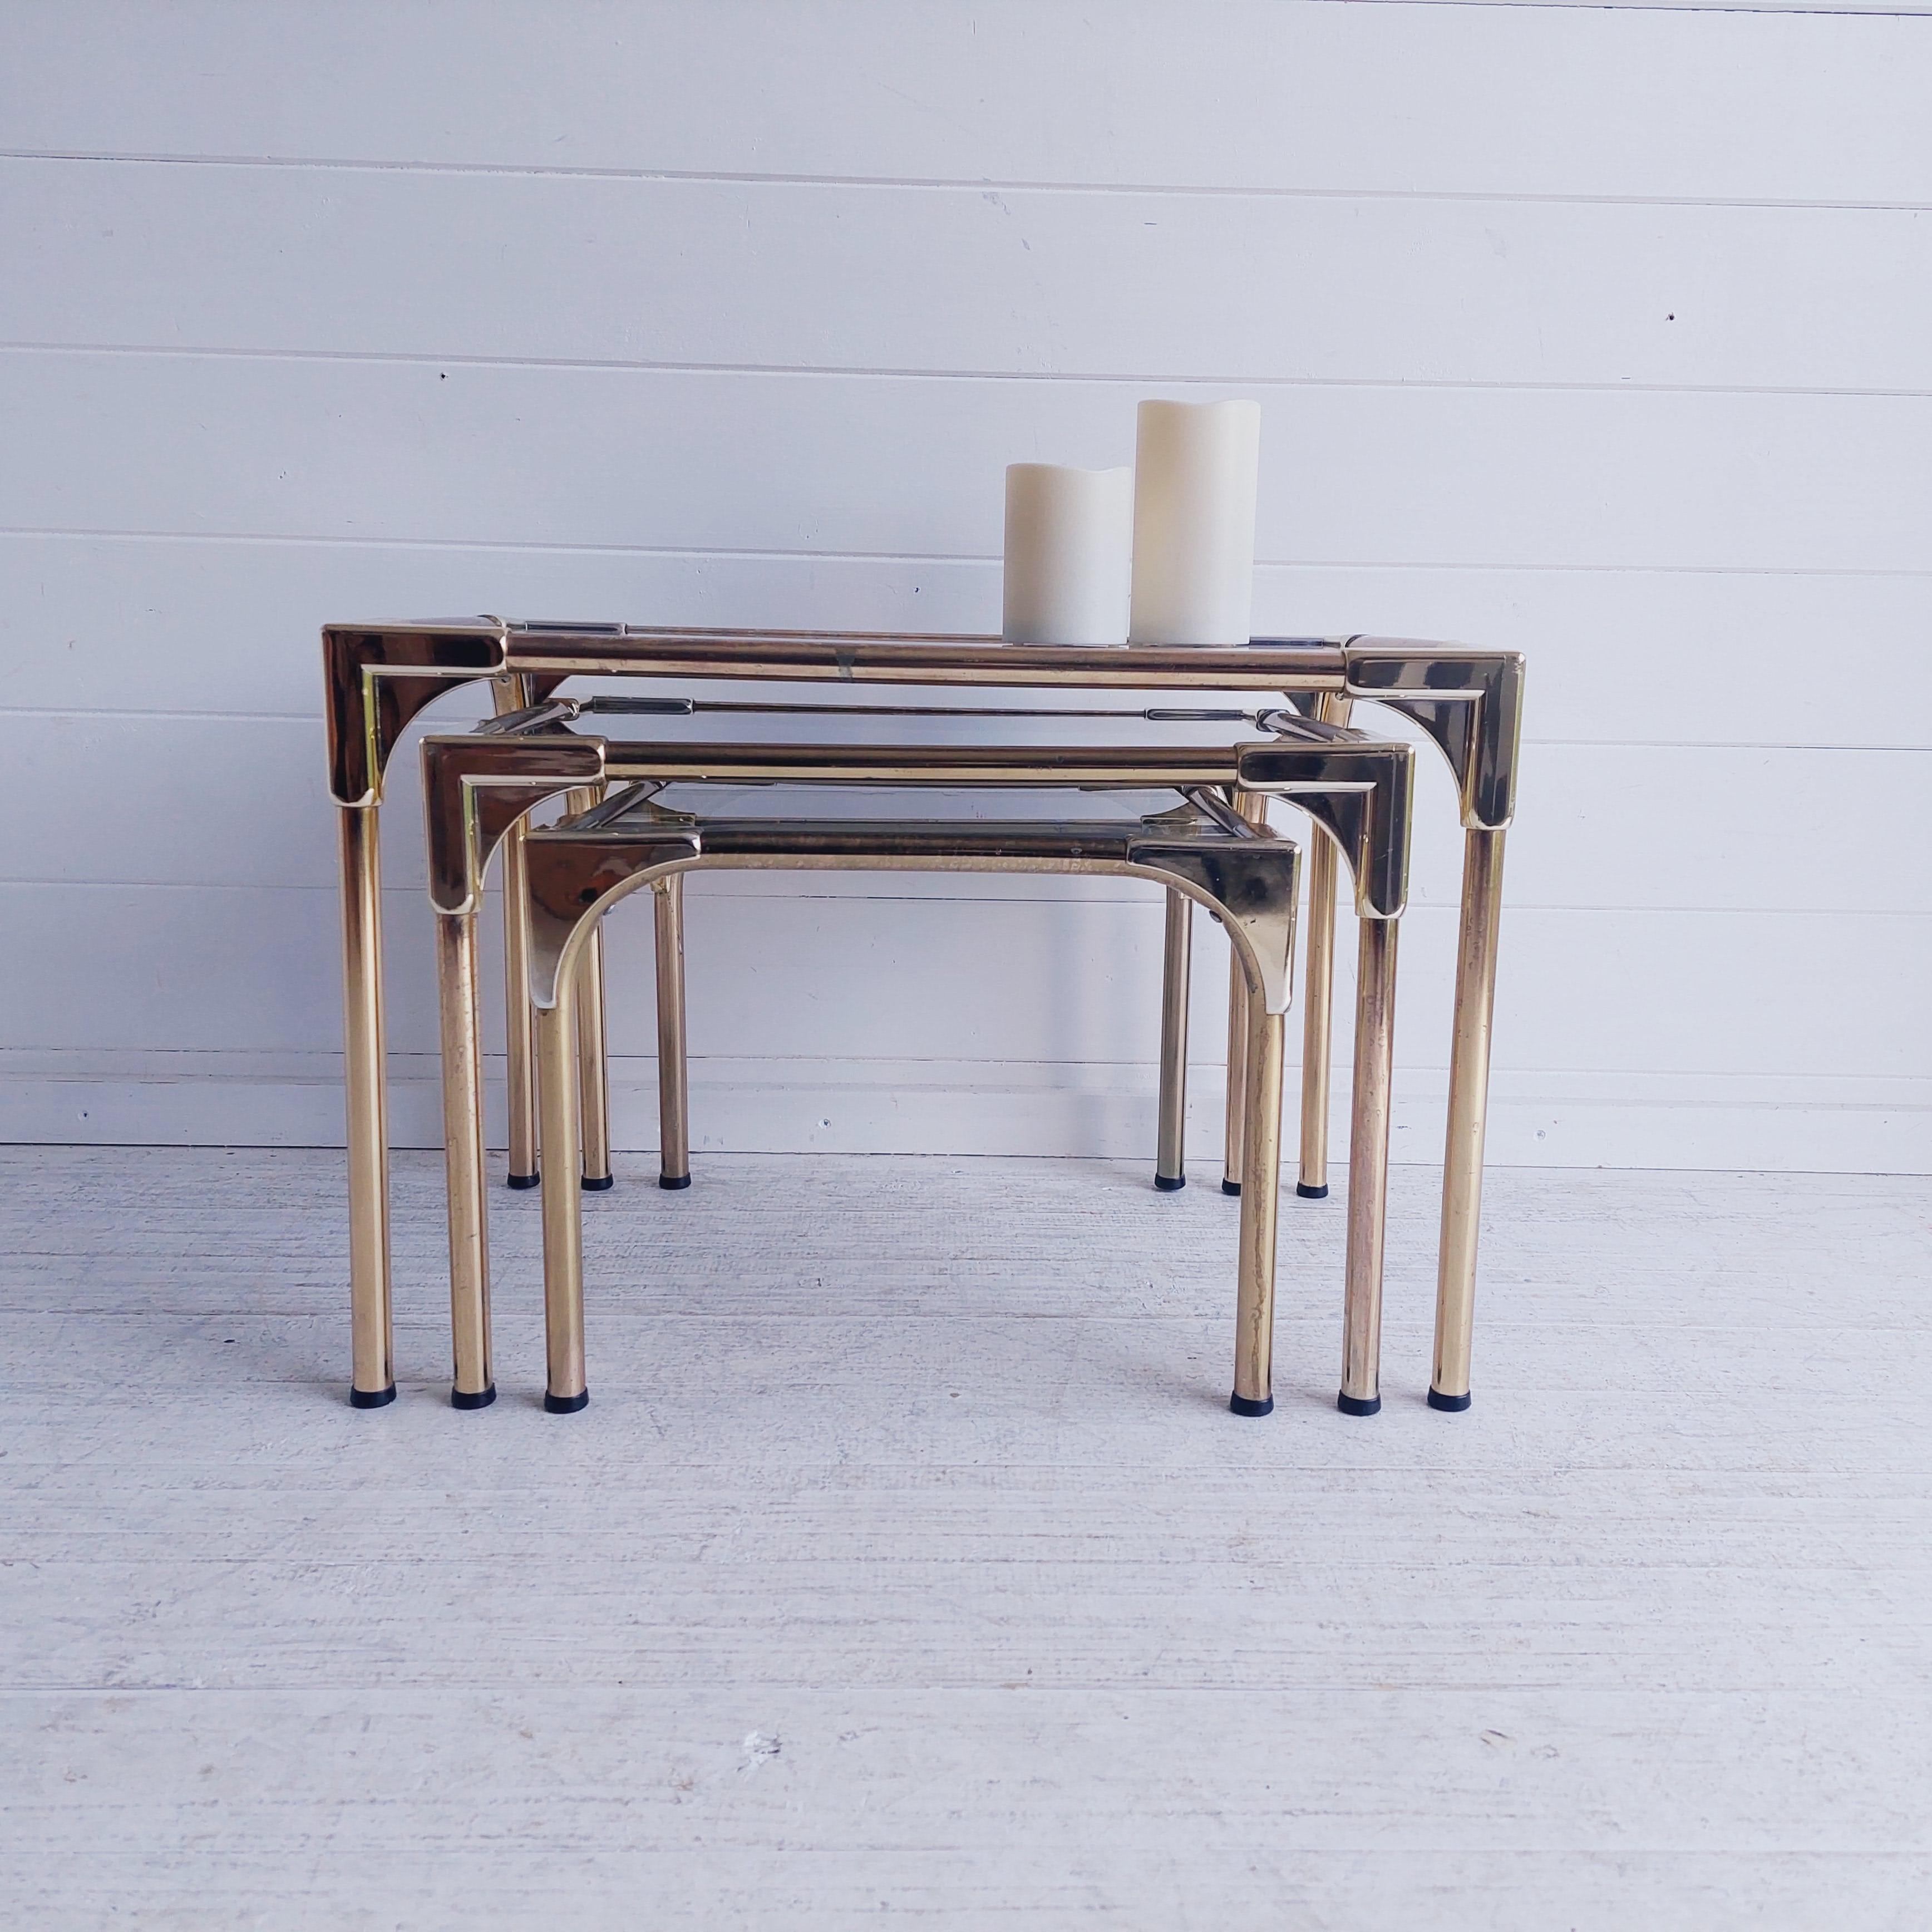 Stylish mid-century modern nesting tables from the 1970s. 
Original circa 1960/70’s Mid-Century Modern French Empire brass and smoked glass tables

Made of gilted aluminum with brass effect with smoked glass and gold plastic joints.
Perfect for